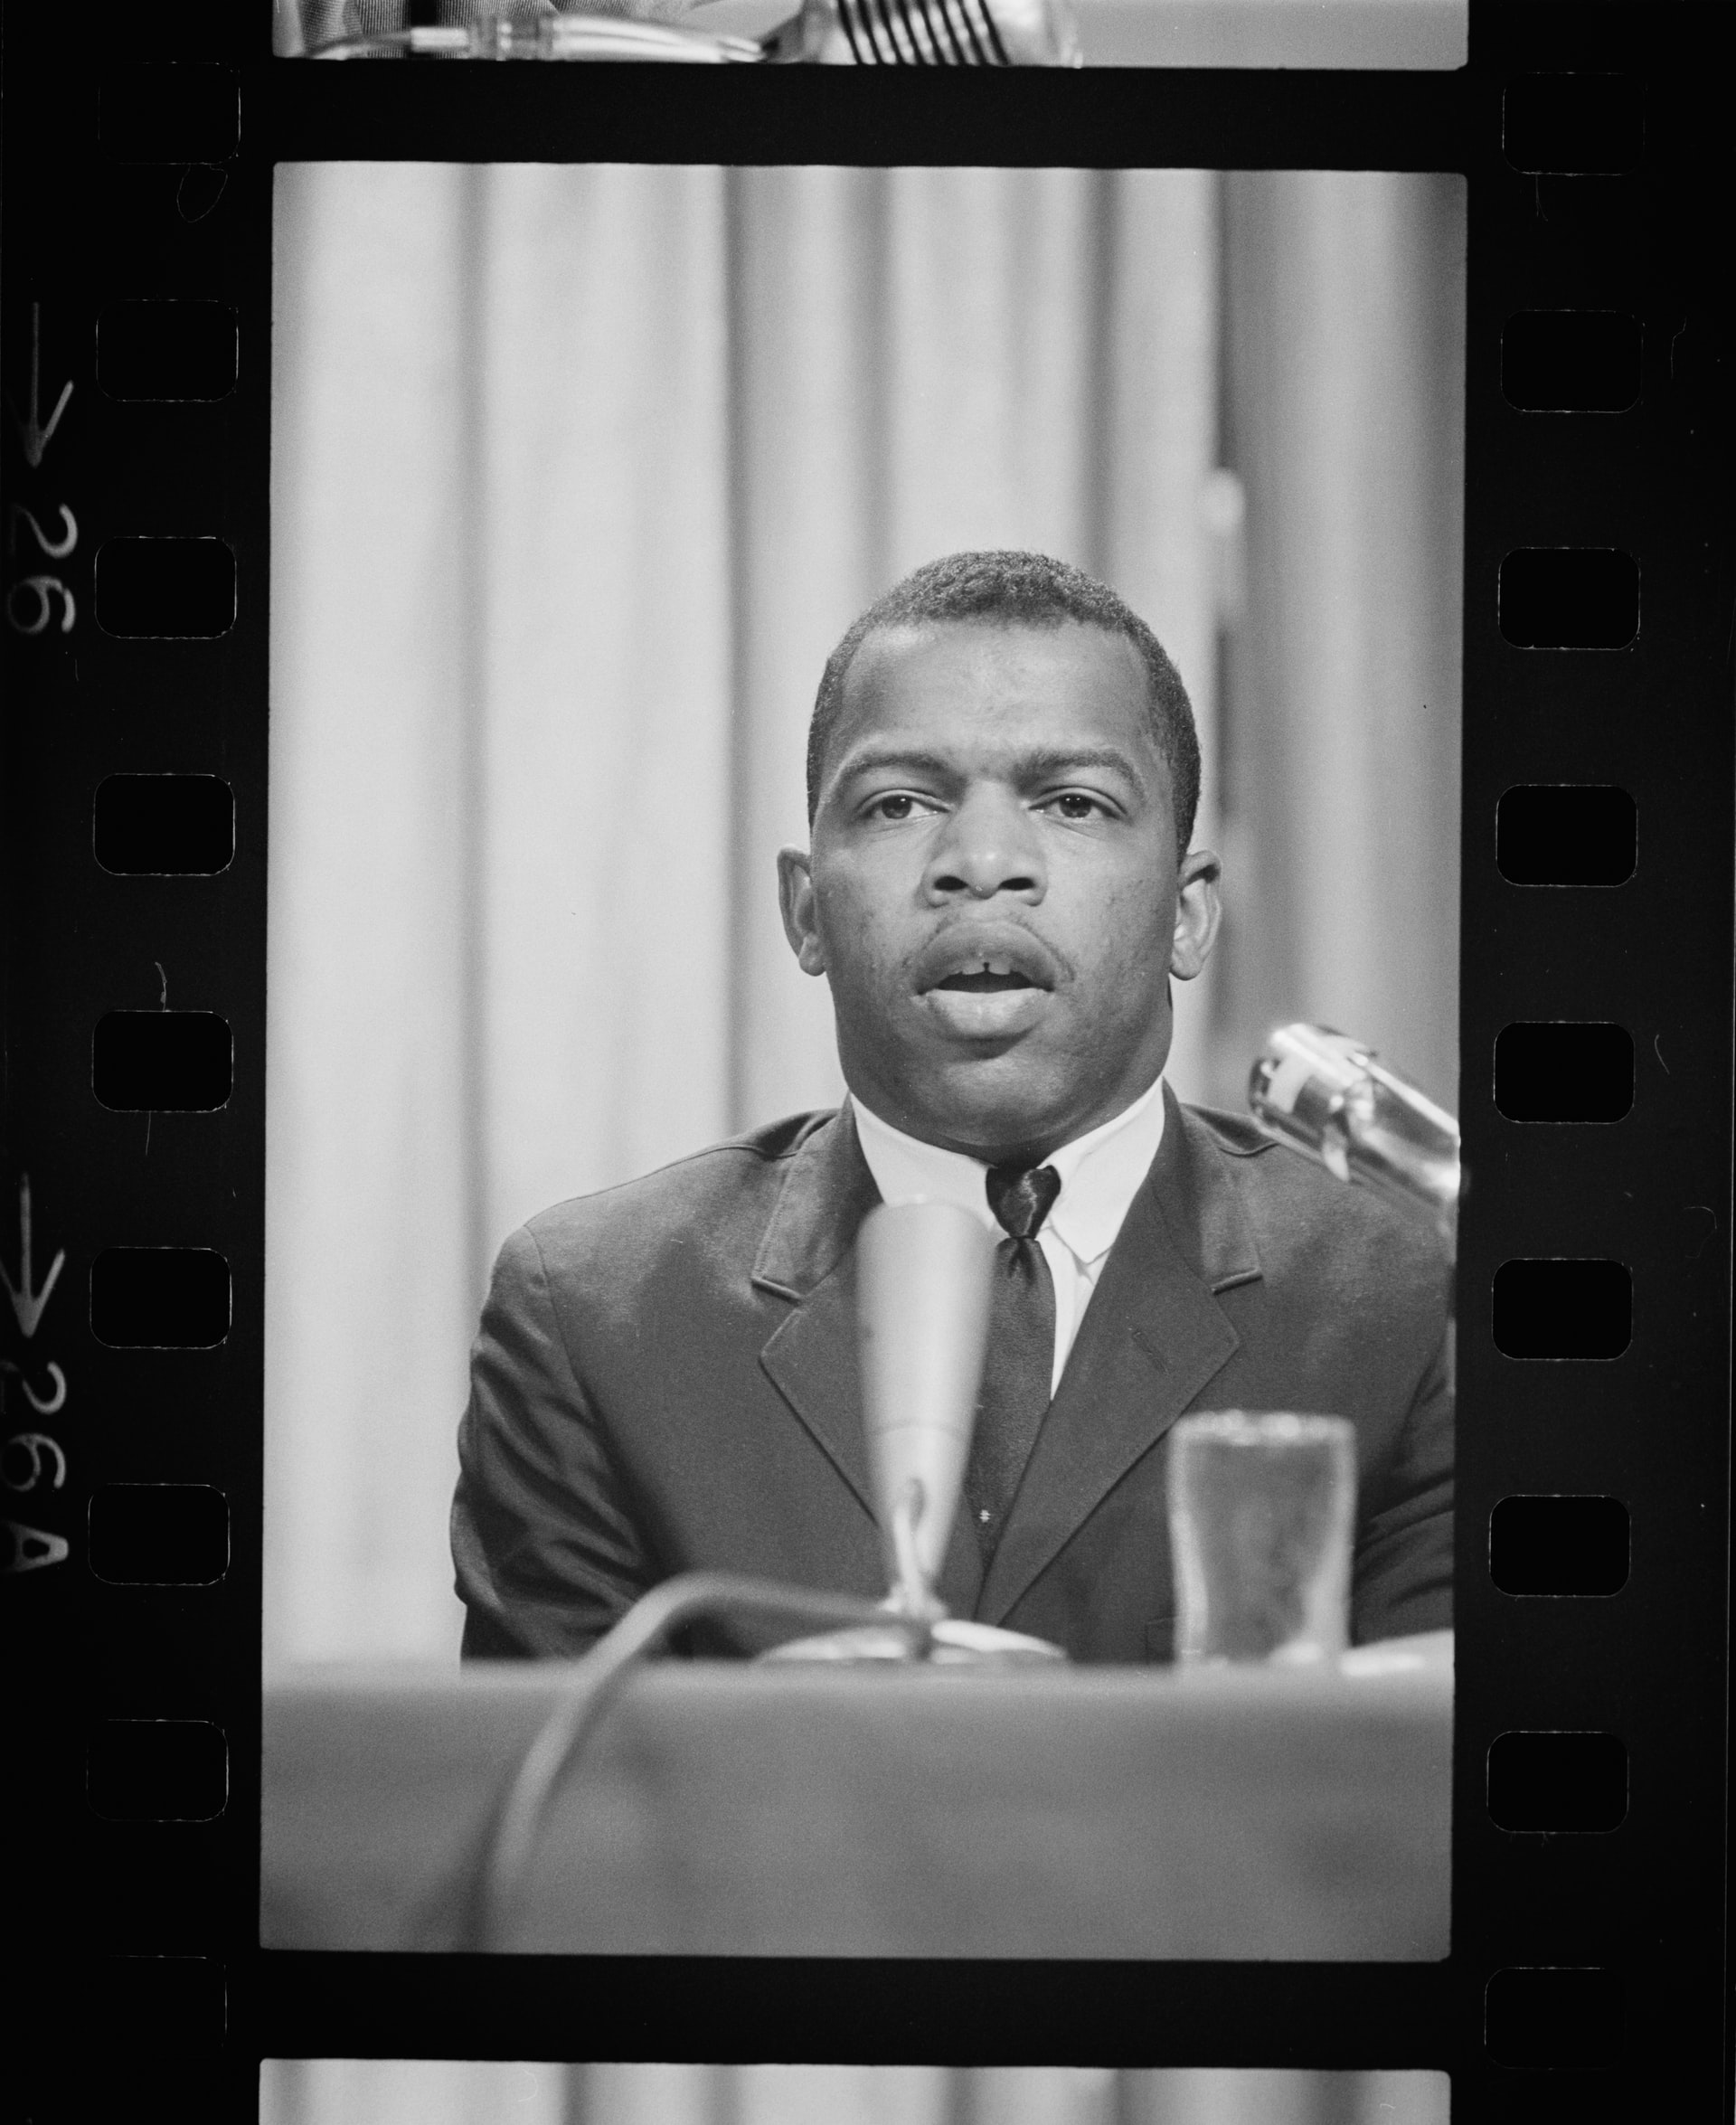 John Lewis speaking at a meeting of American Society of Newspaper Editor, 1964. Photo negative by Marion S. Trikosko.